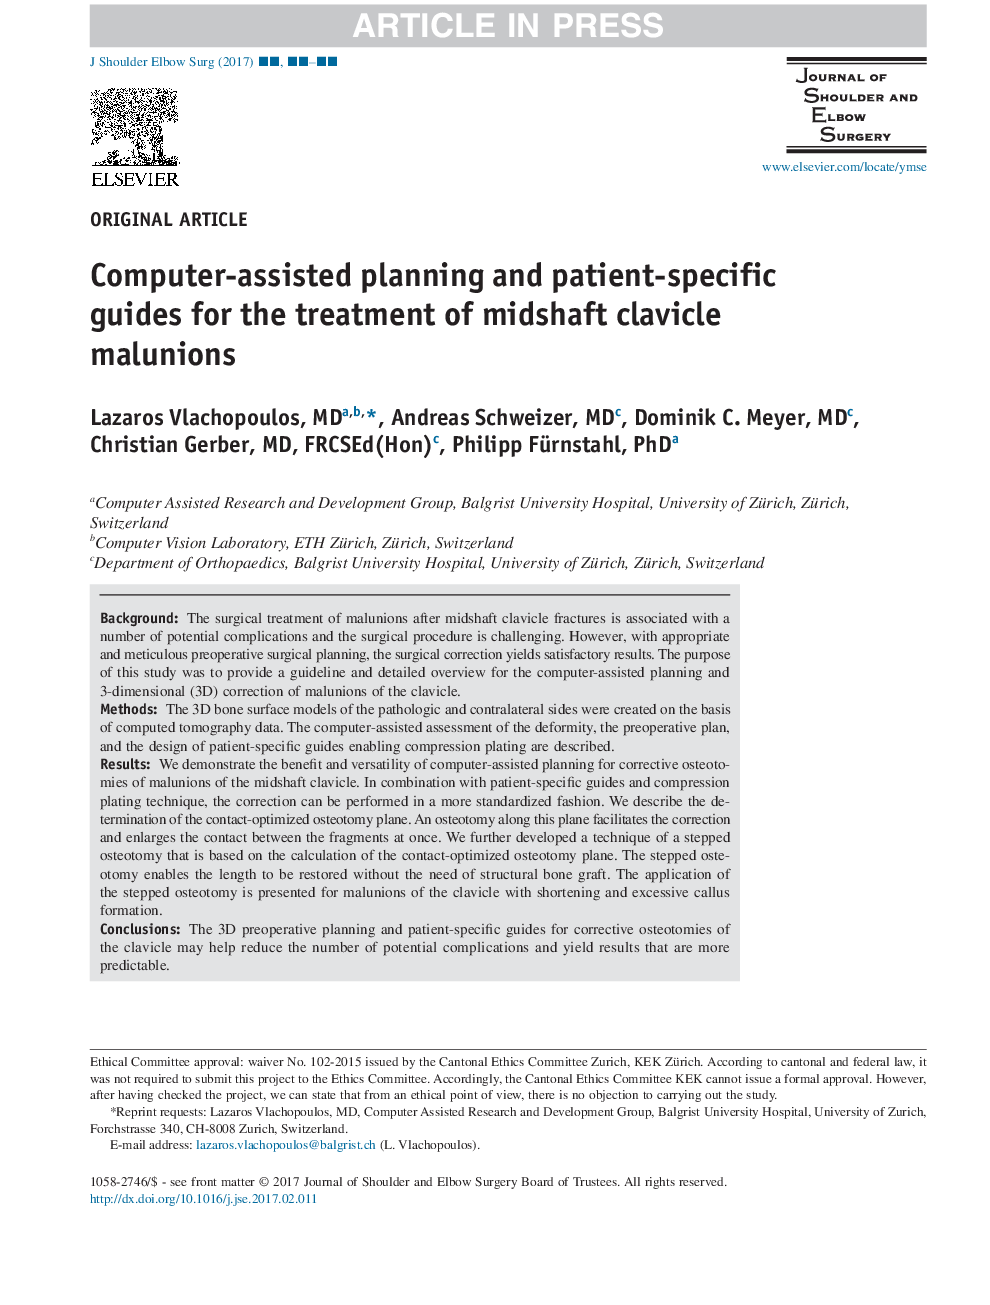 Computer-assisted planning and patient-specific guides for the treatment of midshaft clavicle malunions